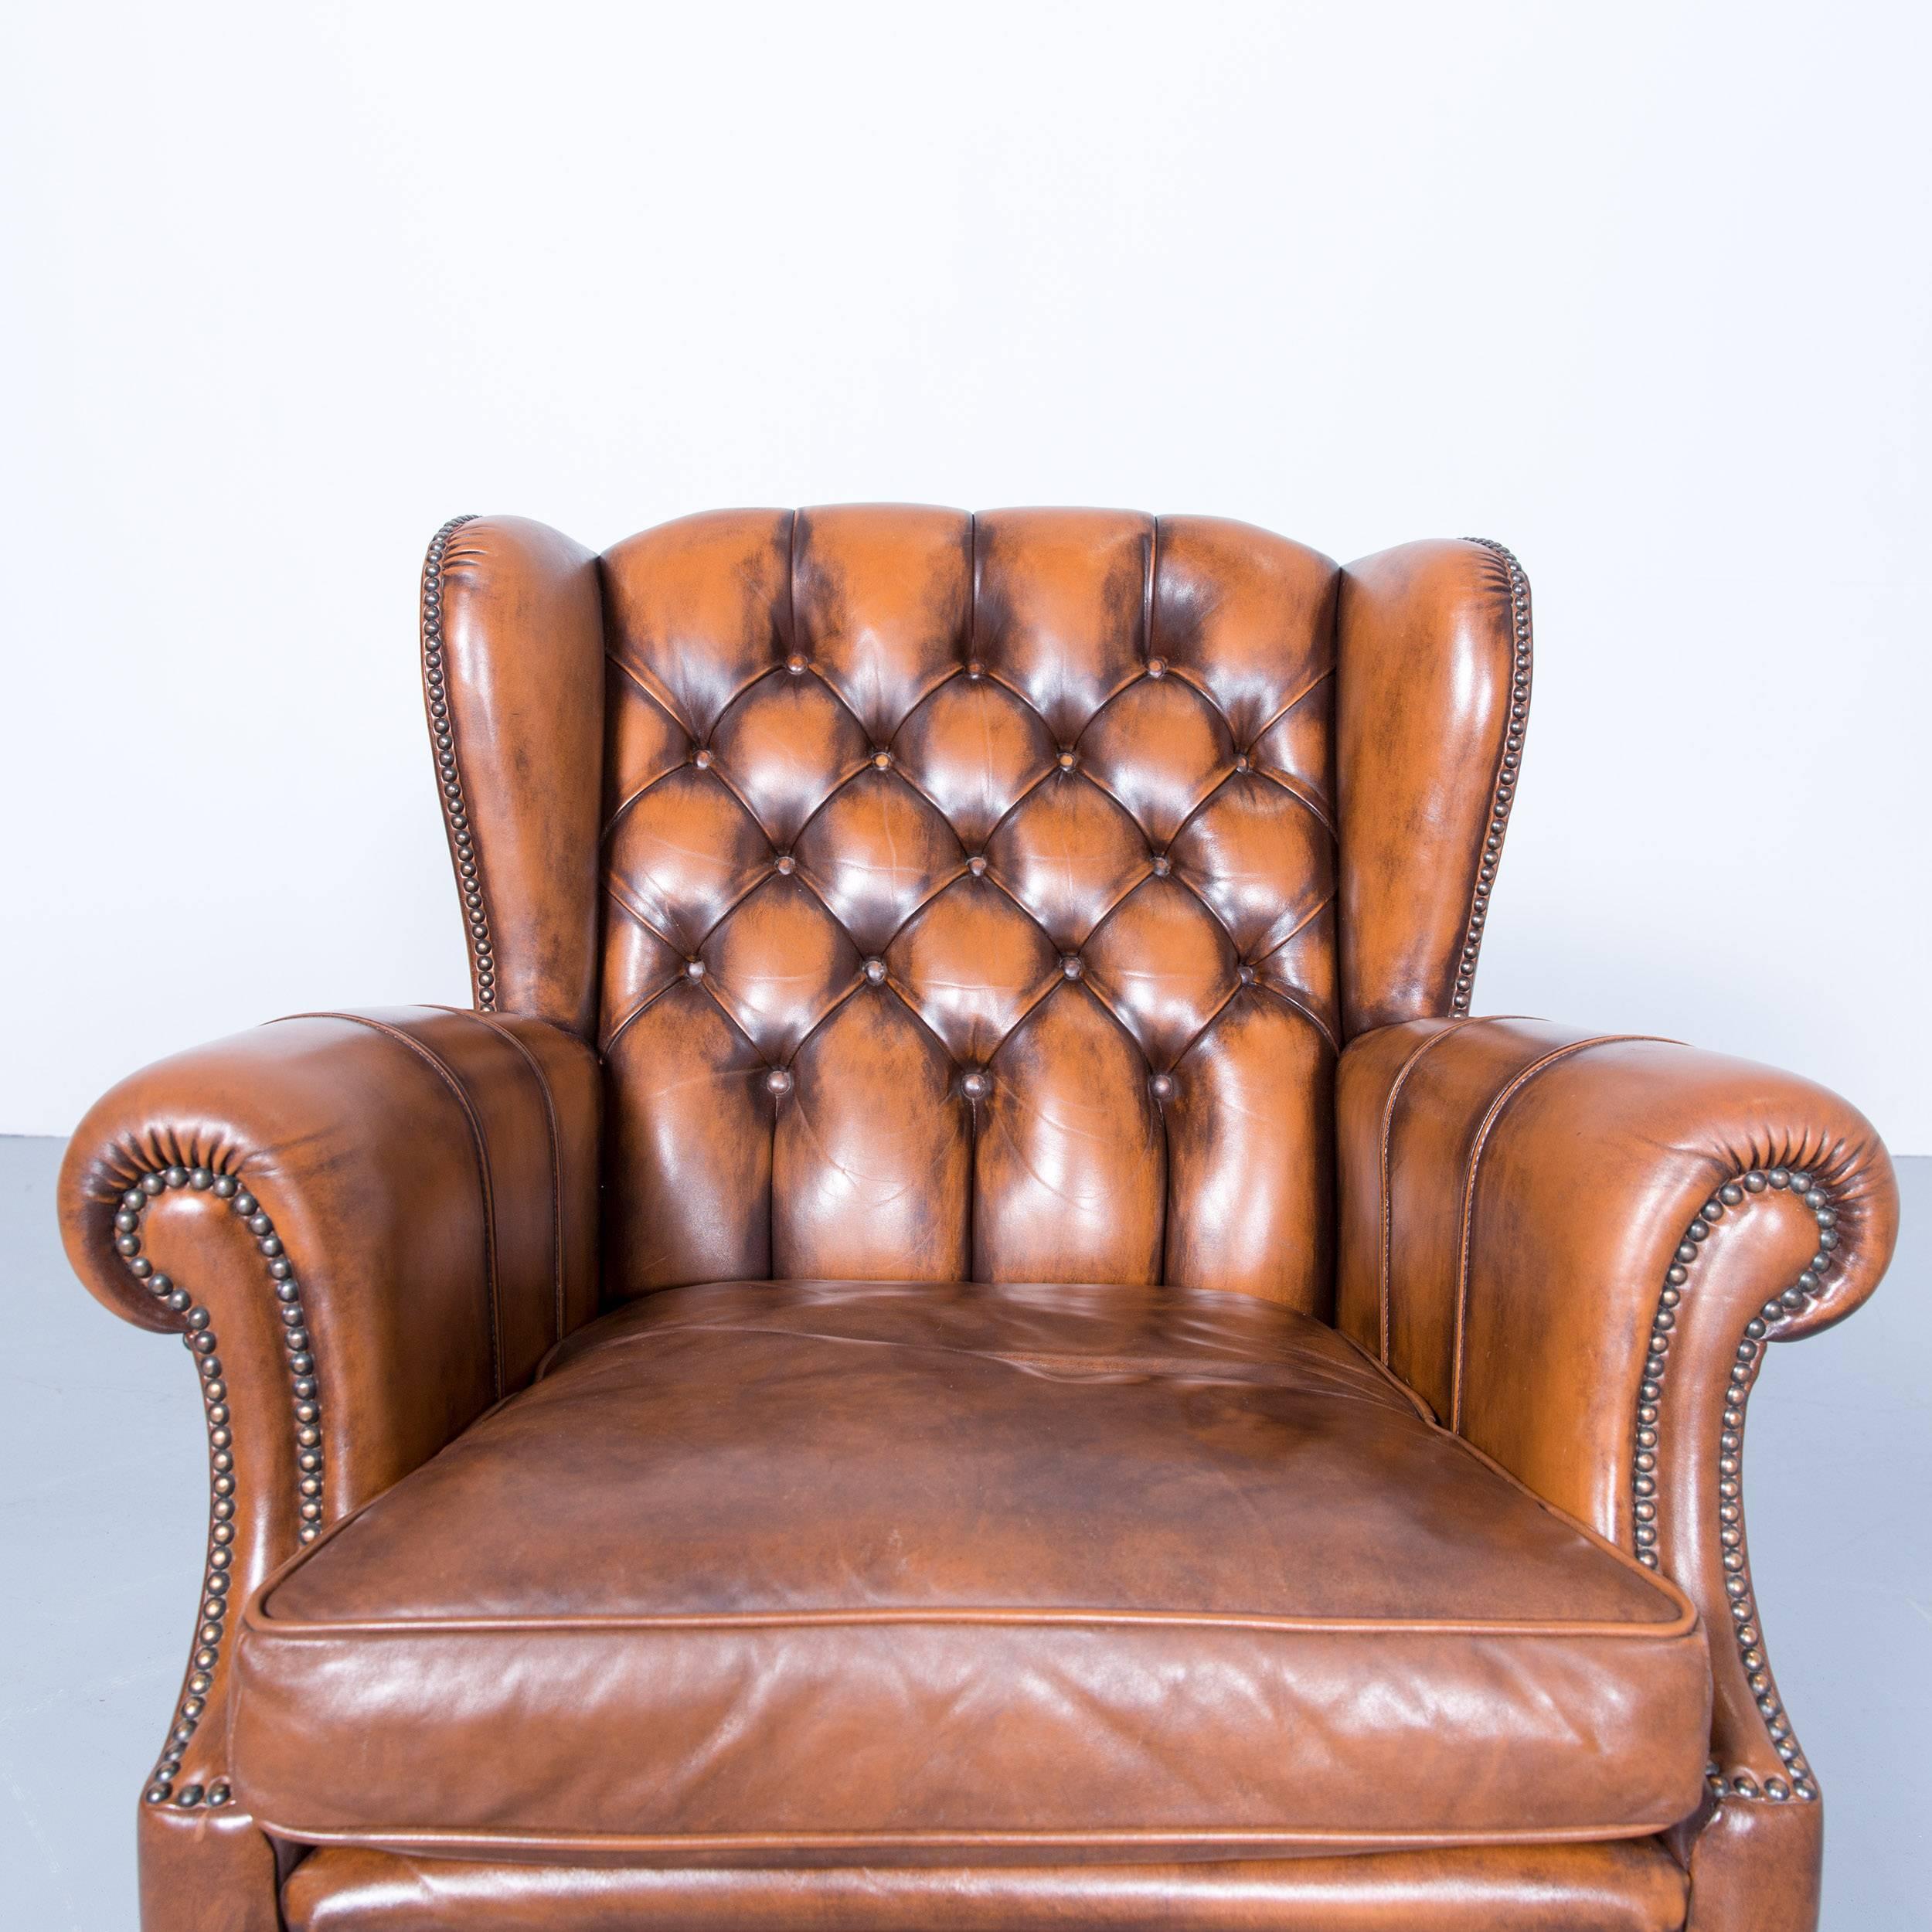 Chesterfield Armchair Leather Brown One Seat Couch Retro Vintage Rivets 1